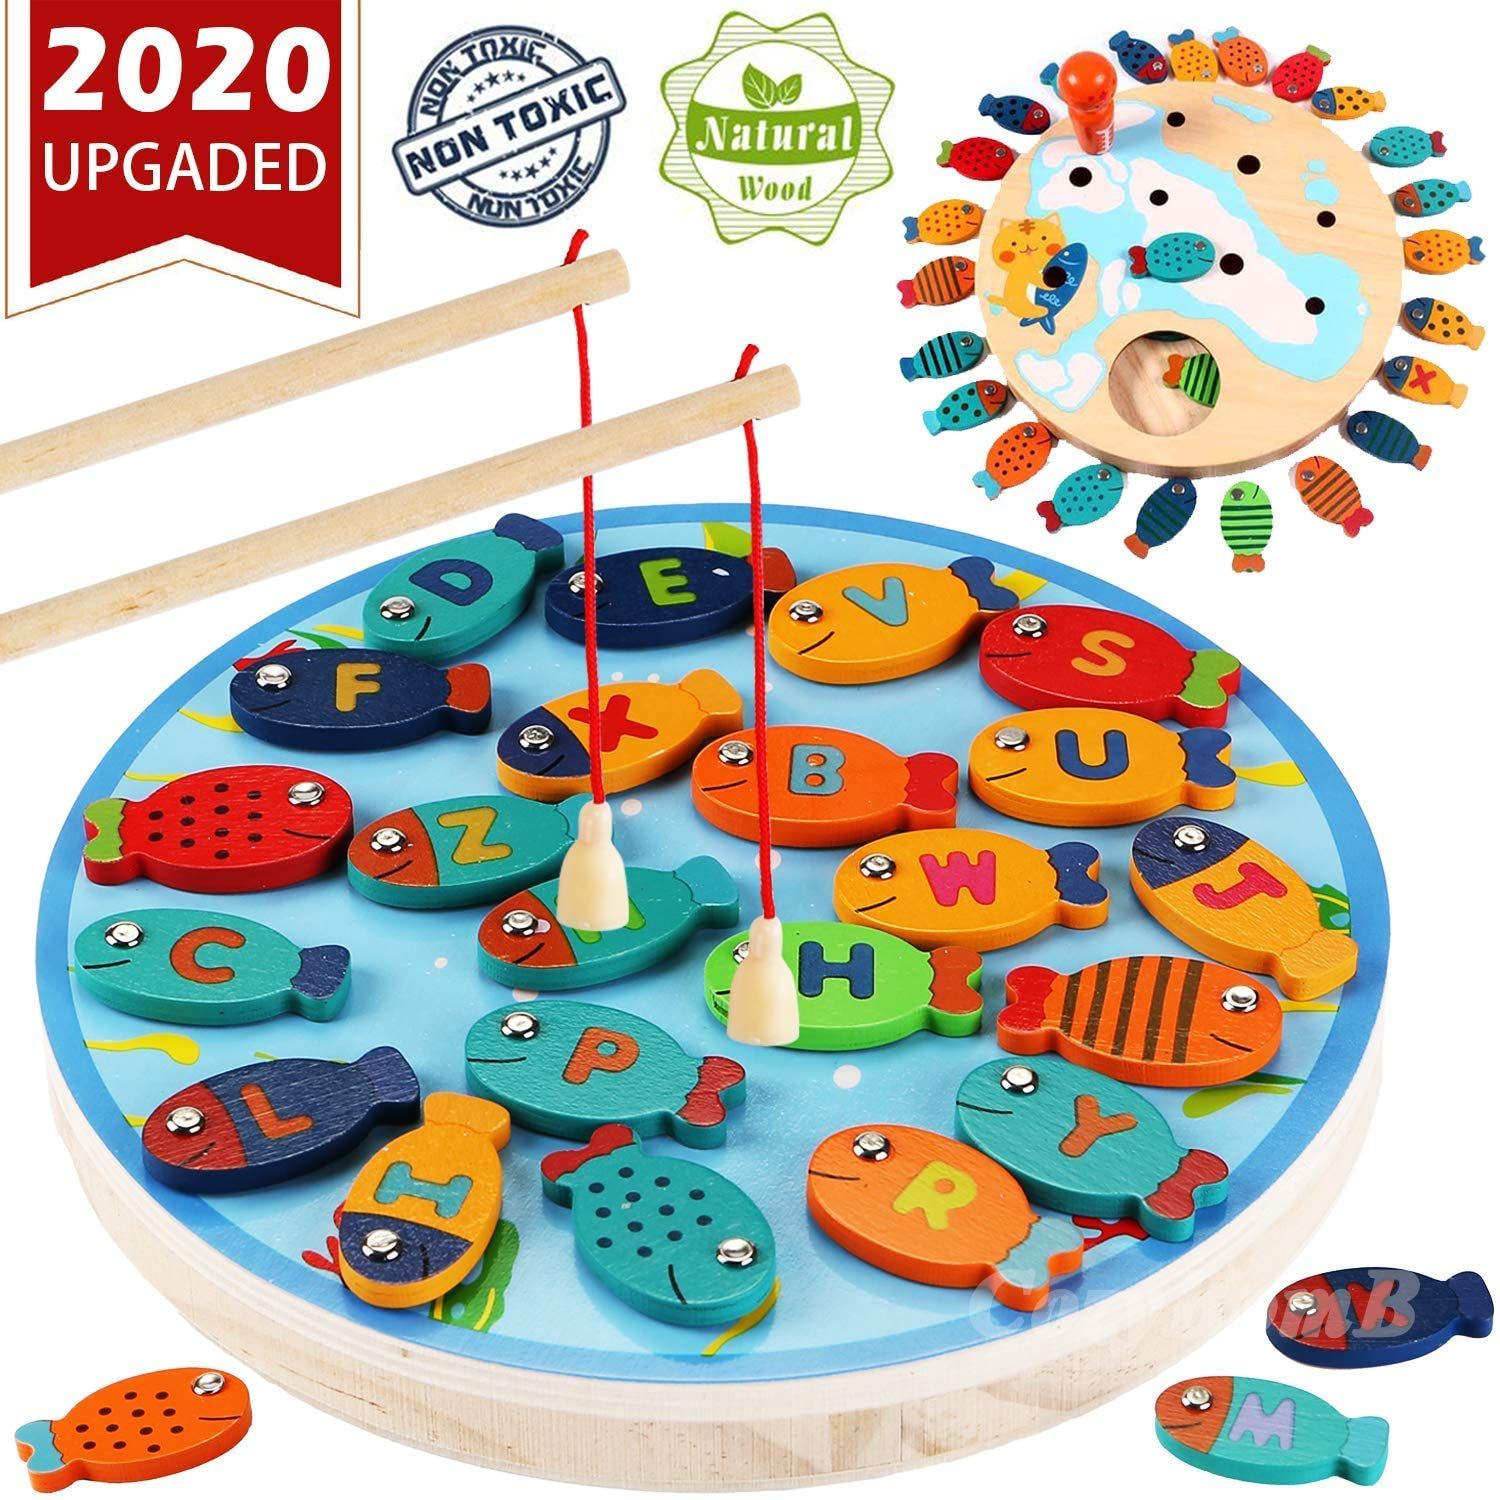 Muxihosn Magnetic Fishing Game Wooden Montessori Preschool Learning Puzzle Toy with 2 Fishing Rods for Toddlers Kids 1 2 3 Years Old 